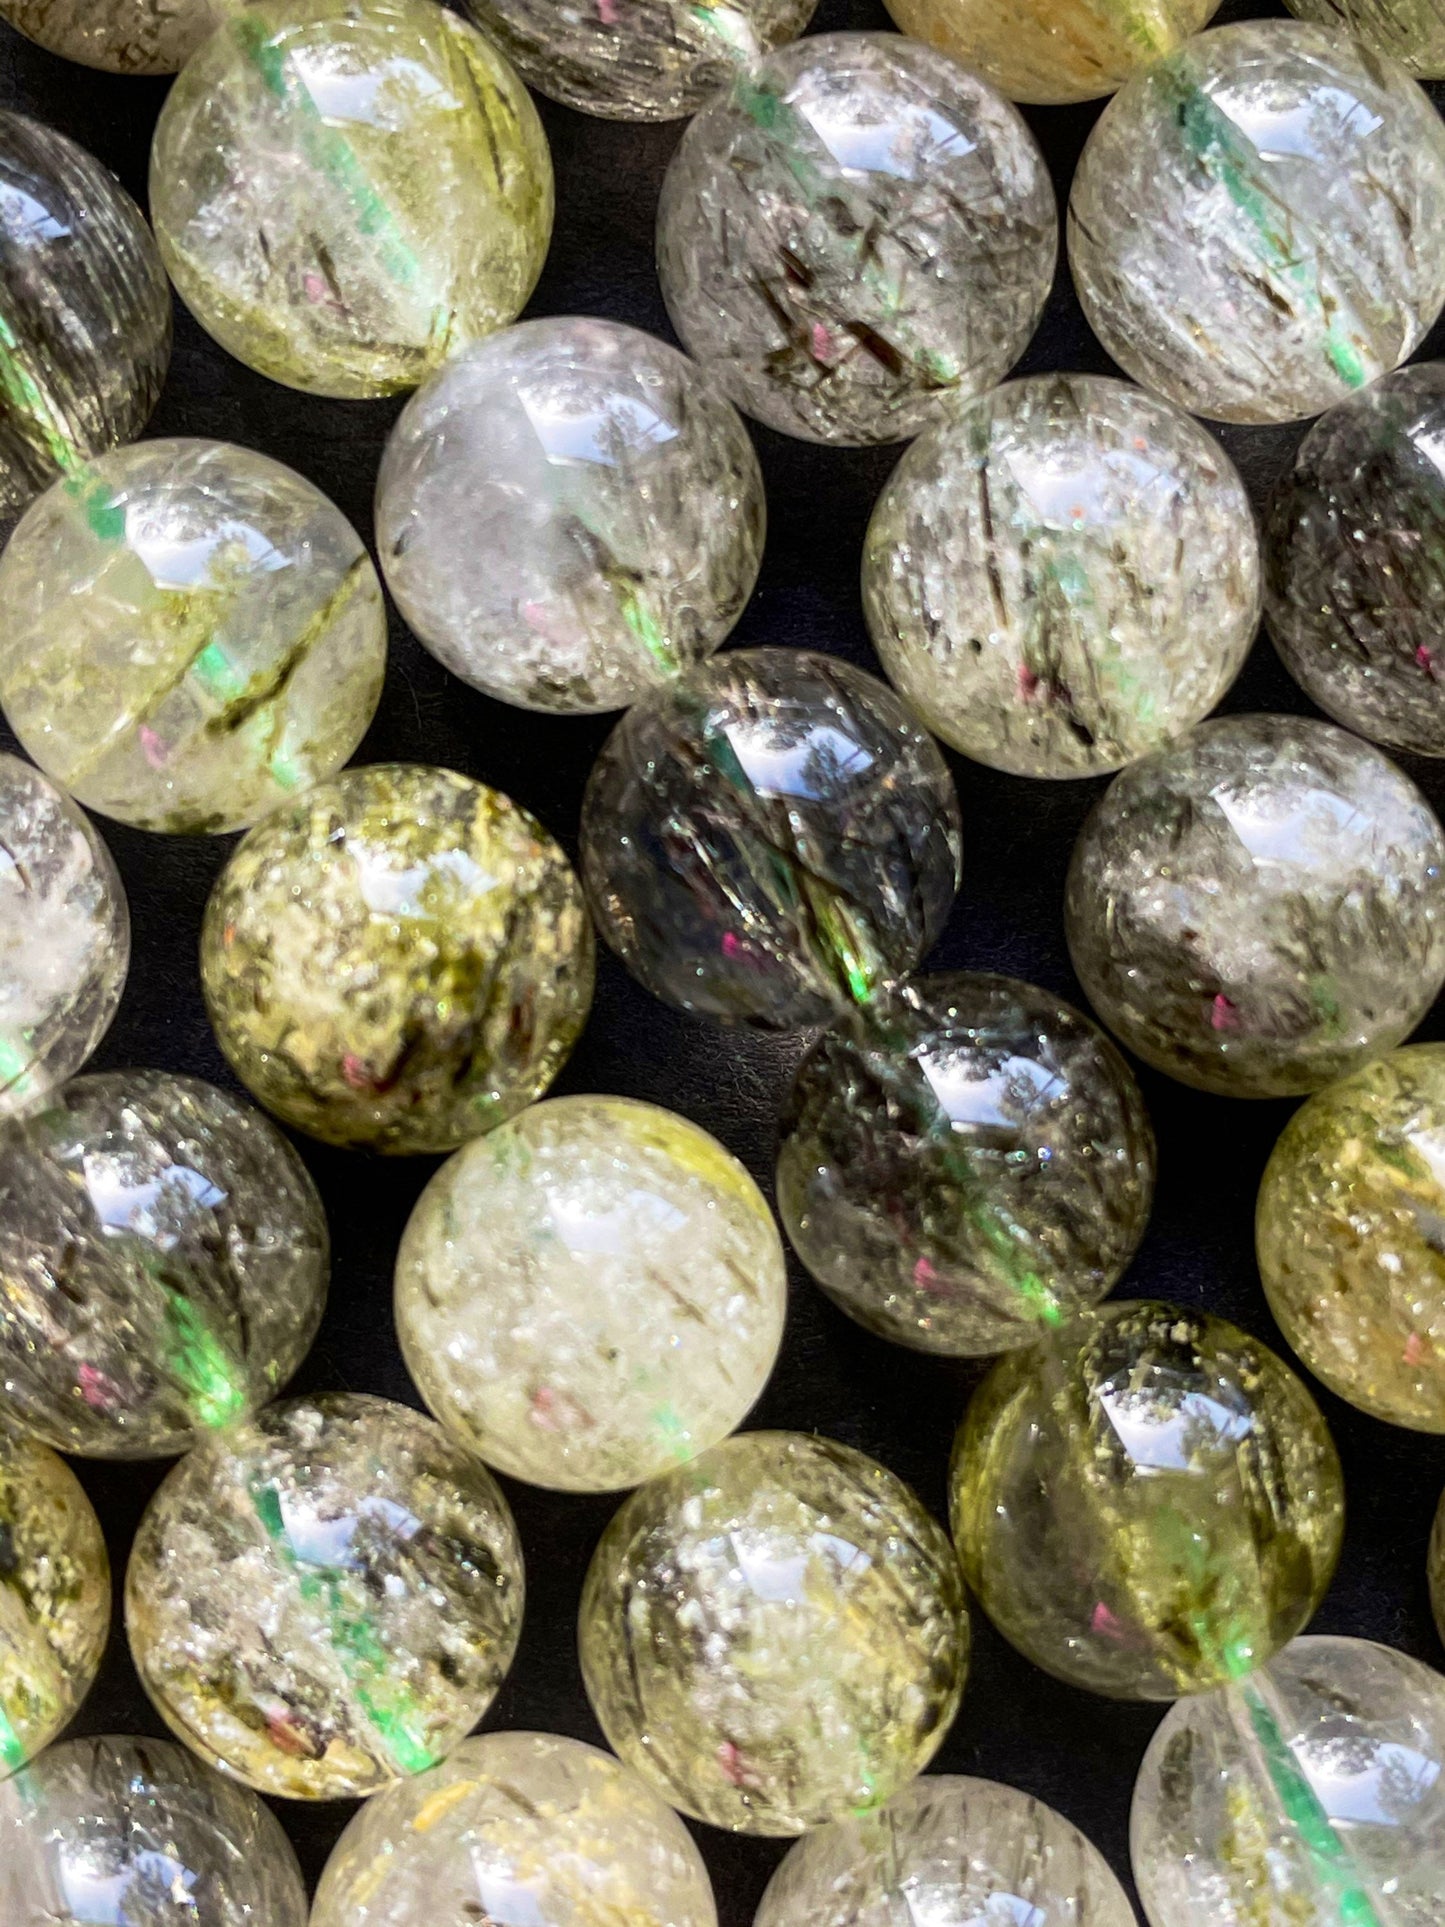 AAA Natural Green Tourmaline Rutilated Quartz Gemstone Bead 6mm 8mm 10mm Round Bead, Gorgeous Green with Black Rutilated Hairs Tourmaline Quartz Bead Excellent Quality